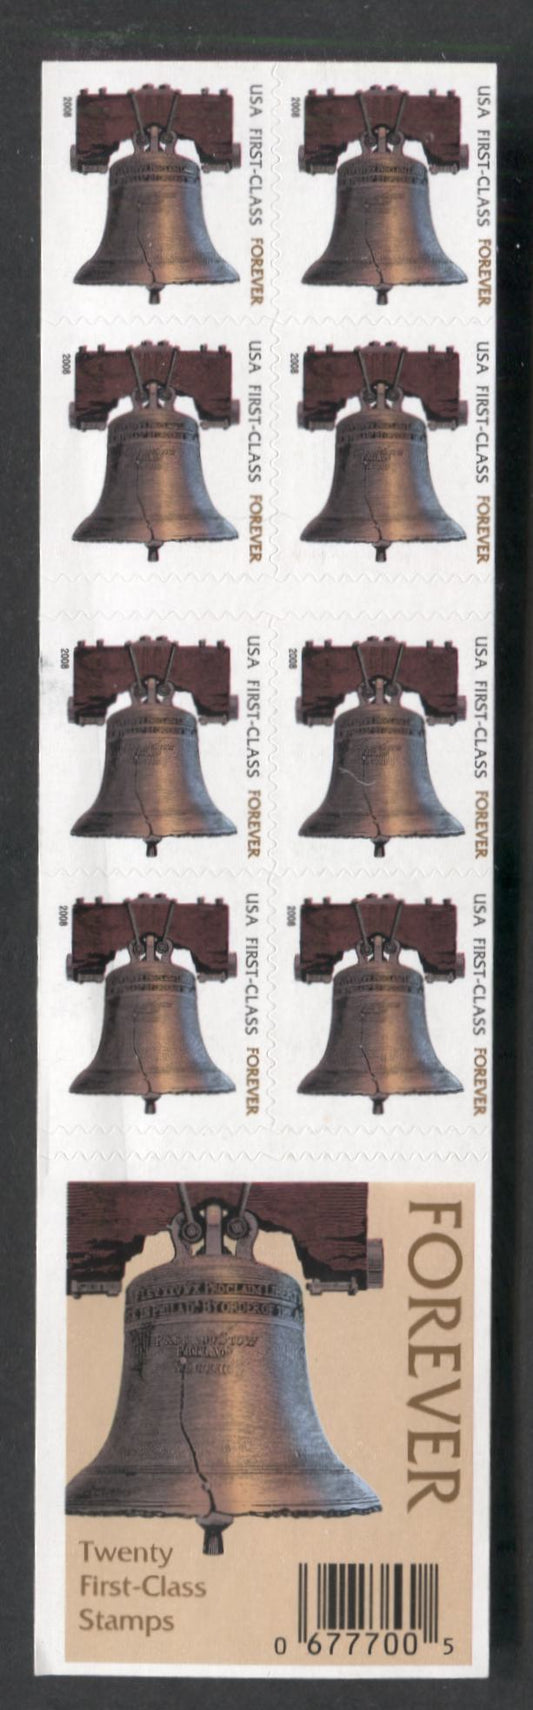 Lot 26 United States SC#4125c First Class Multicolored 2008 Liberty Bell Issue, Double Sided Booklet, Dated 2008, Large Microprinting, A VFNH Booklet Of 20, Click on Listing to See ALL Pictures, 2017 Scott Cat. $18